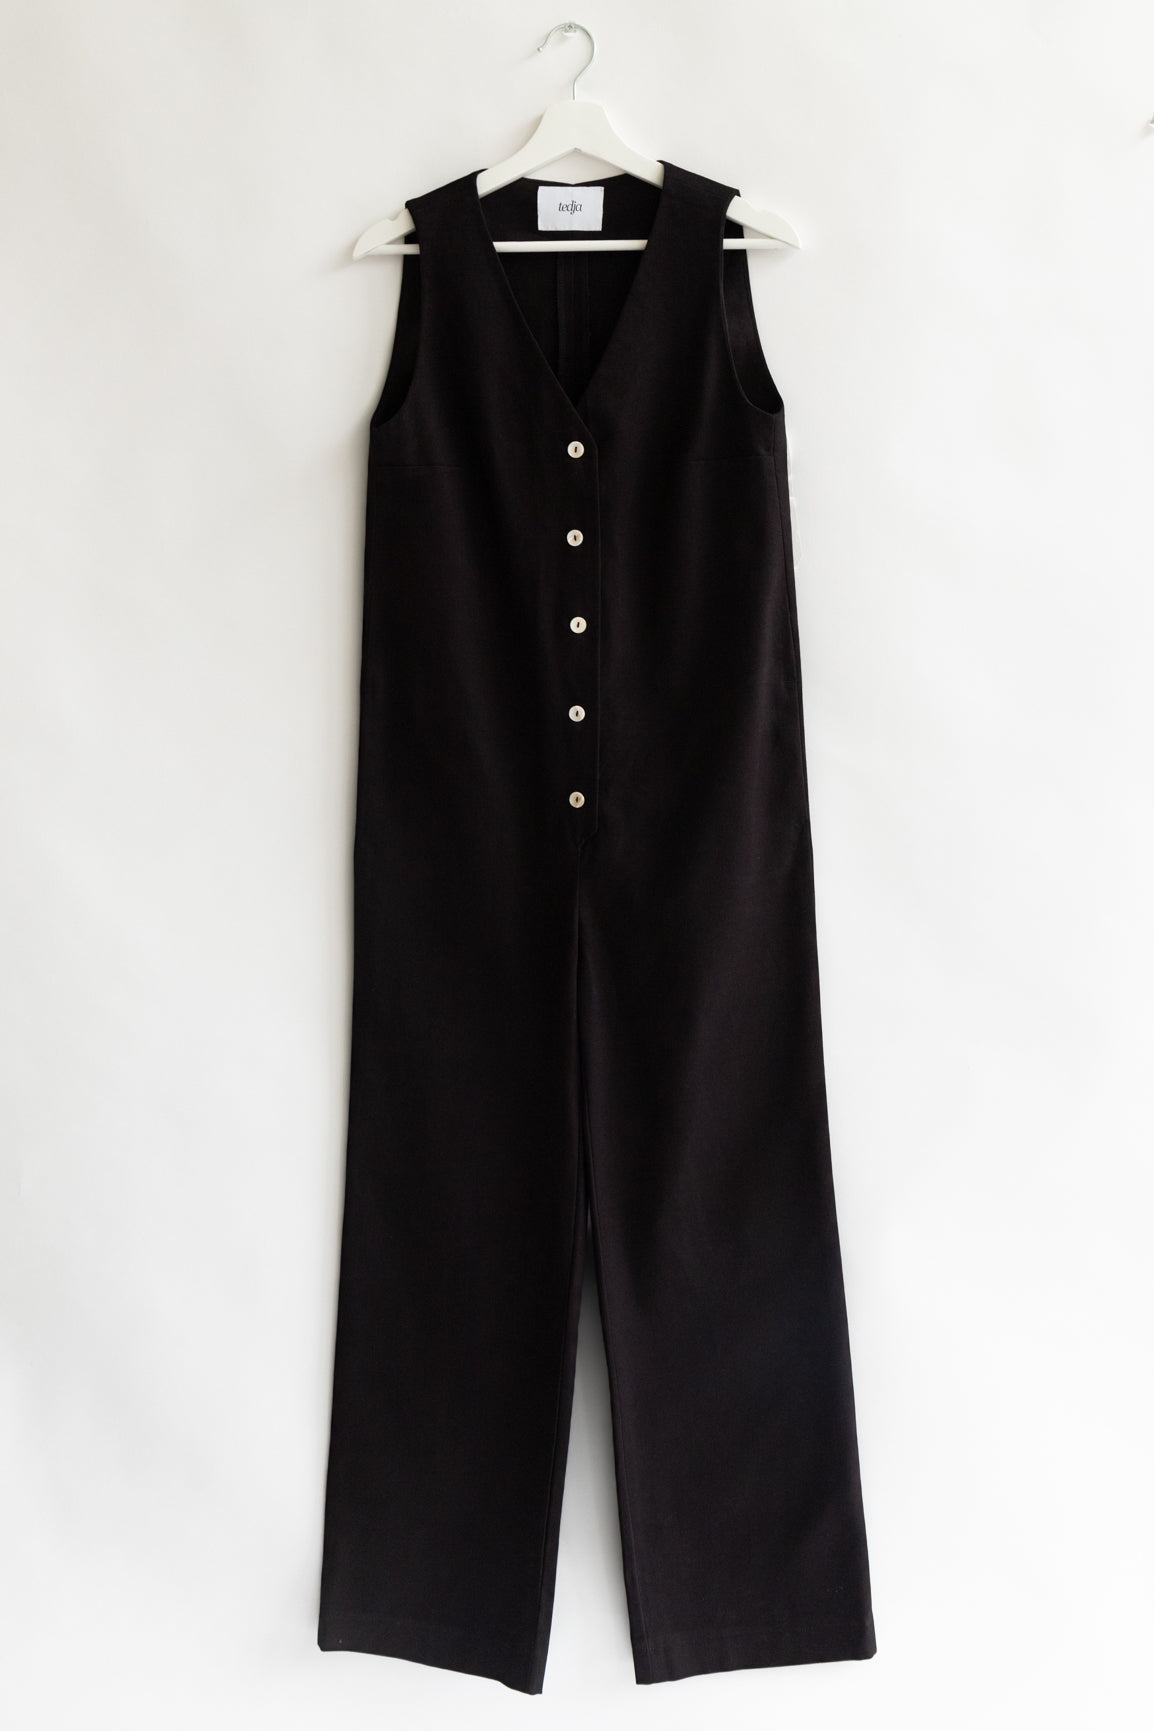 Black color Jumpsuit overall workwear cotton canvas with pockets 5 buttons v-neck tall girls short girls oeko-tex sustainable clothes handmade